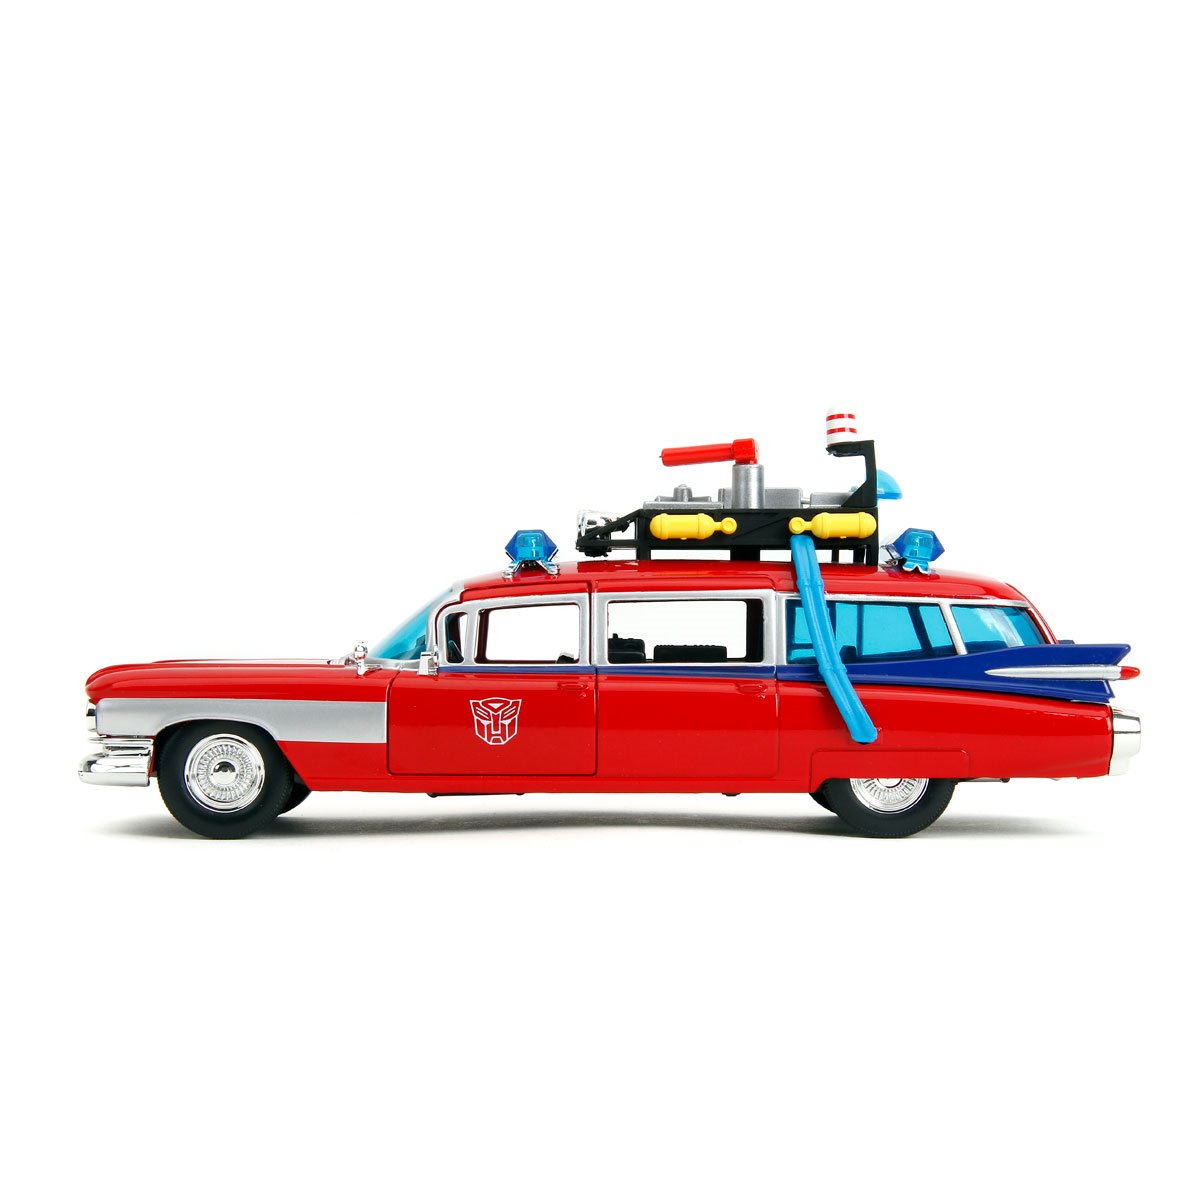 Ghostbusters x Transformers Hollywood Rides Ecto-1 (Optimus Prime Deco) 1:24 Scale Diecast Vehicle